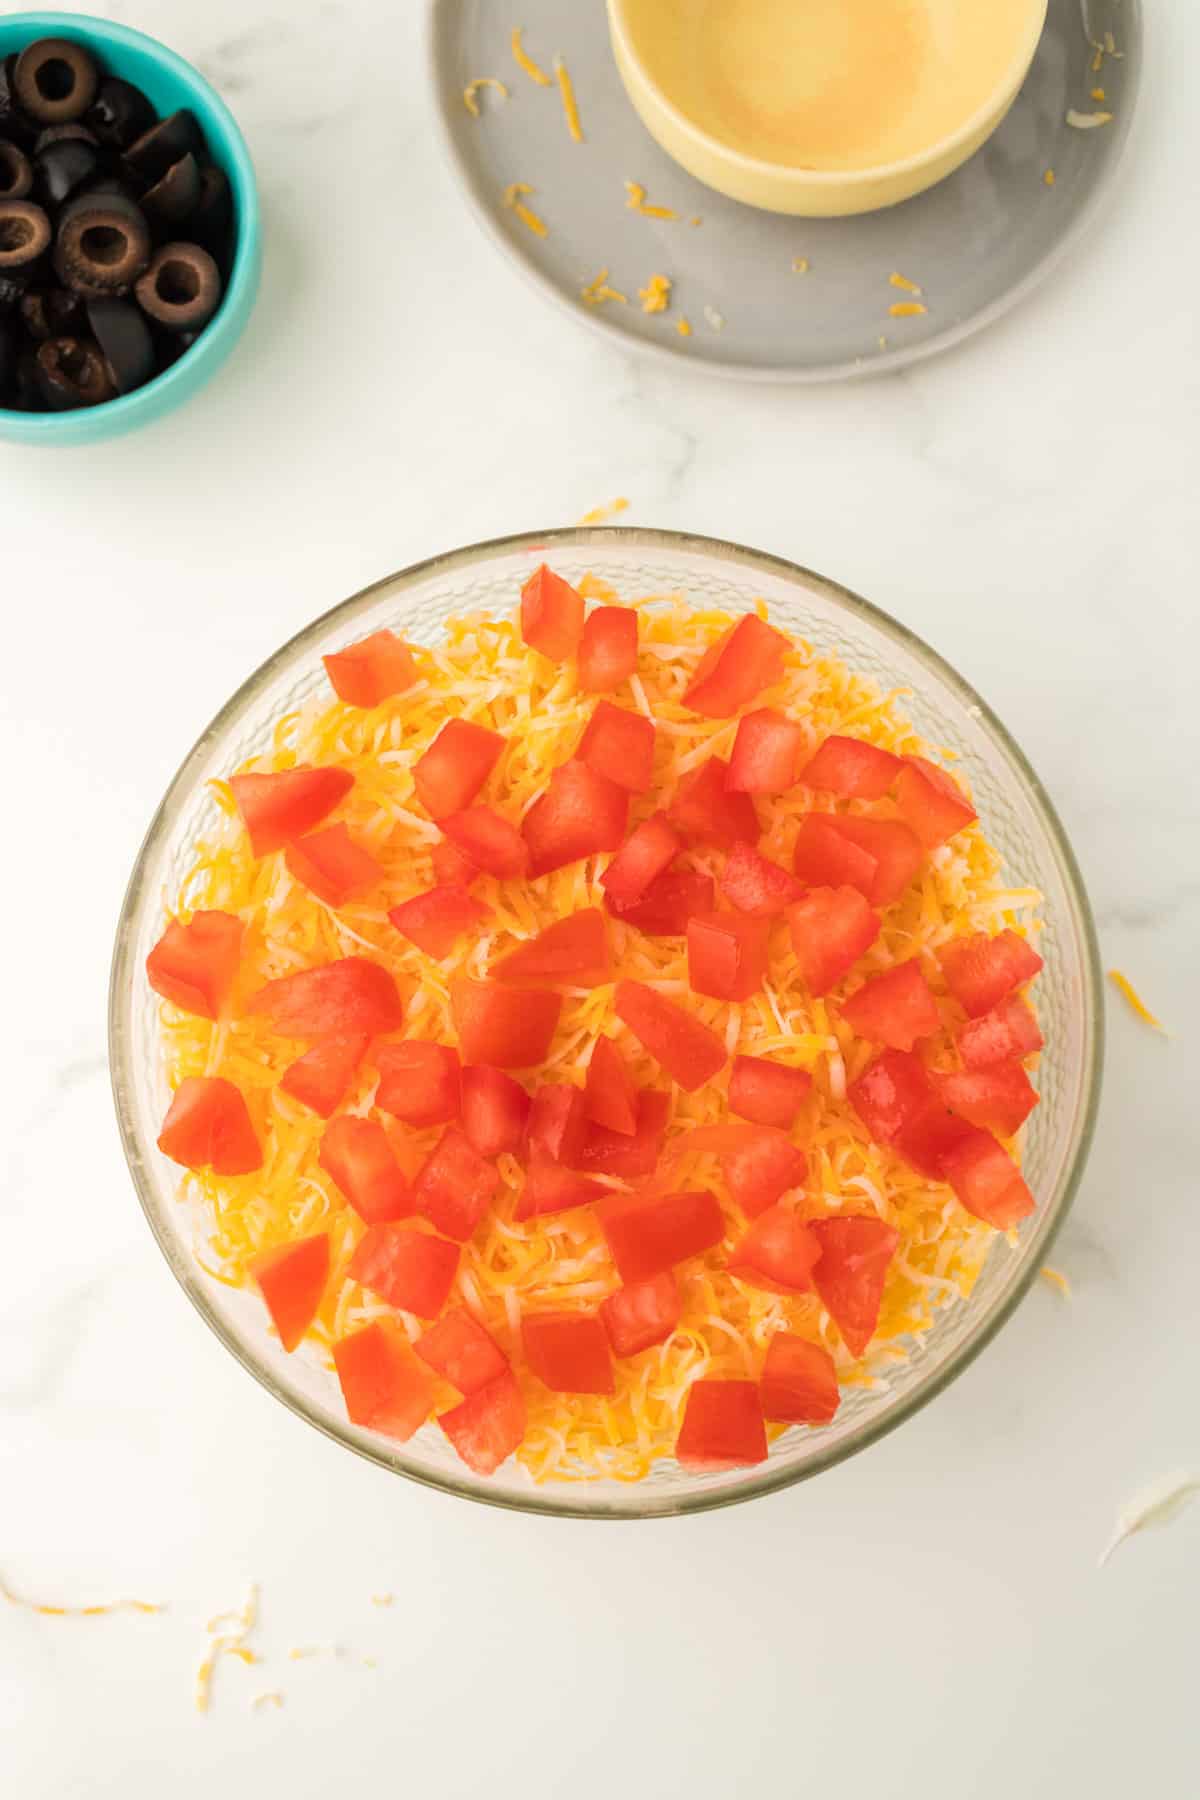 Shredded cheese and diced tomatoes addd to bowl.